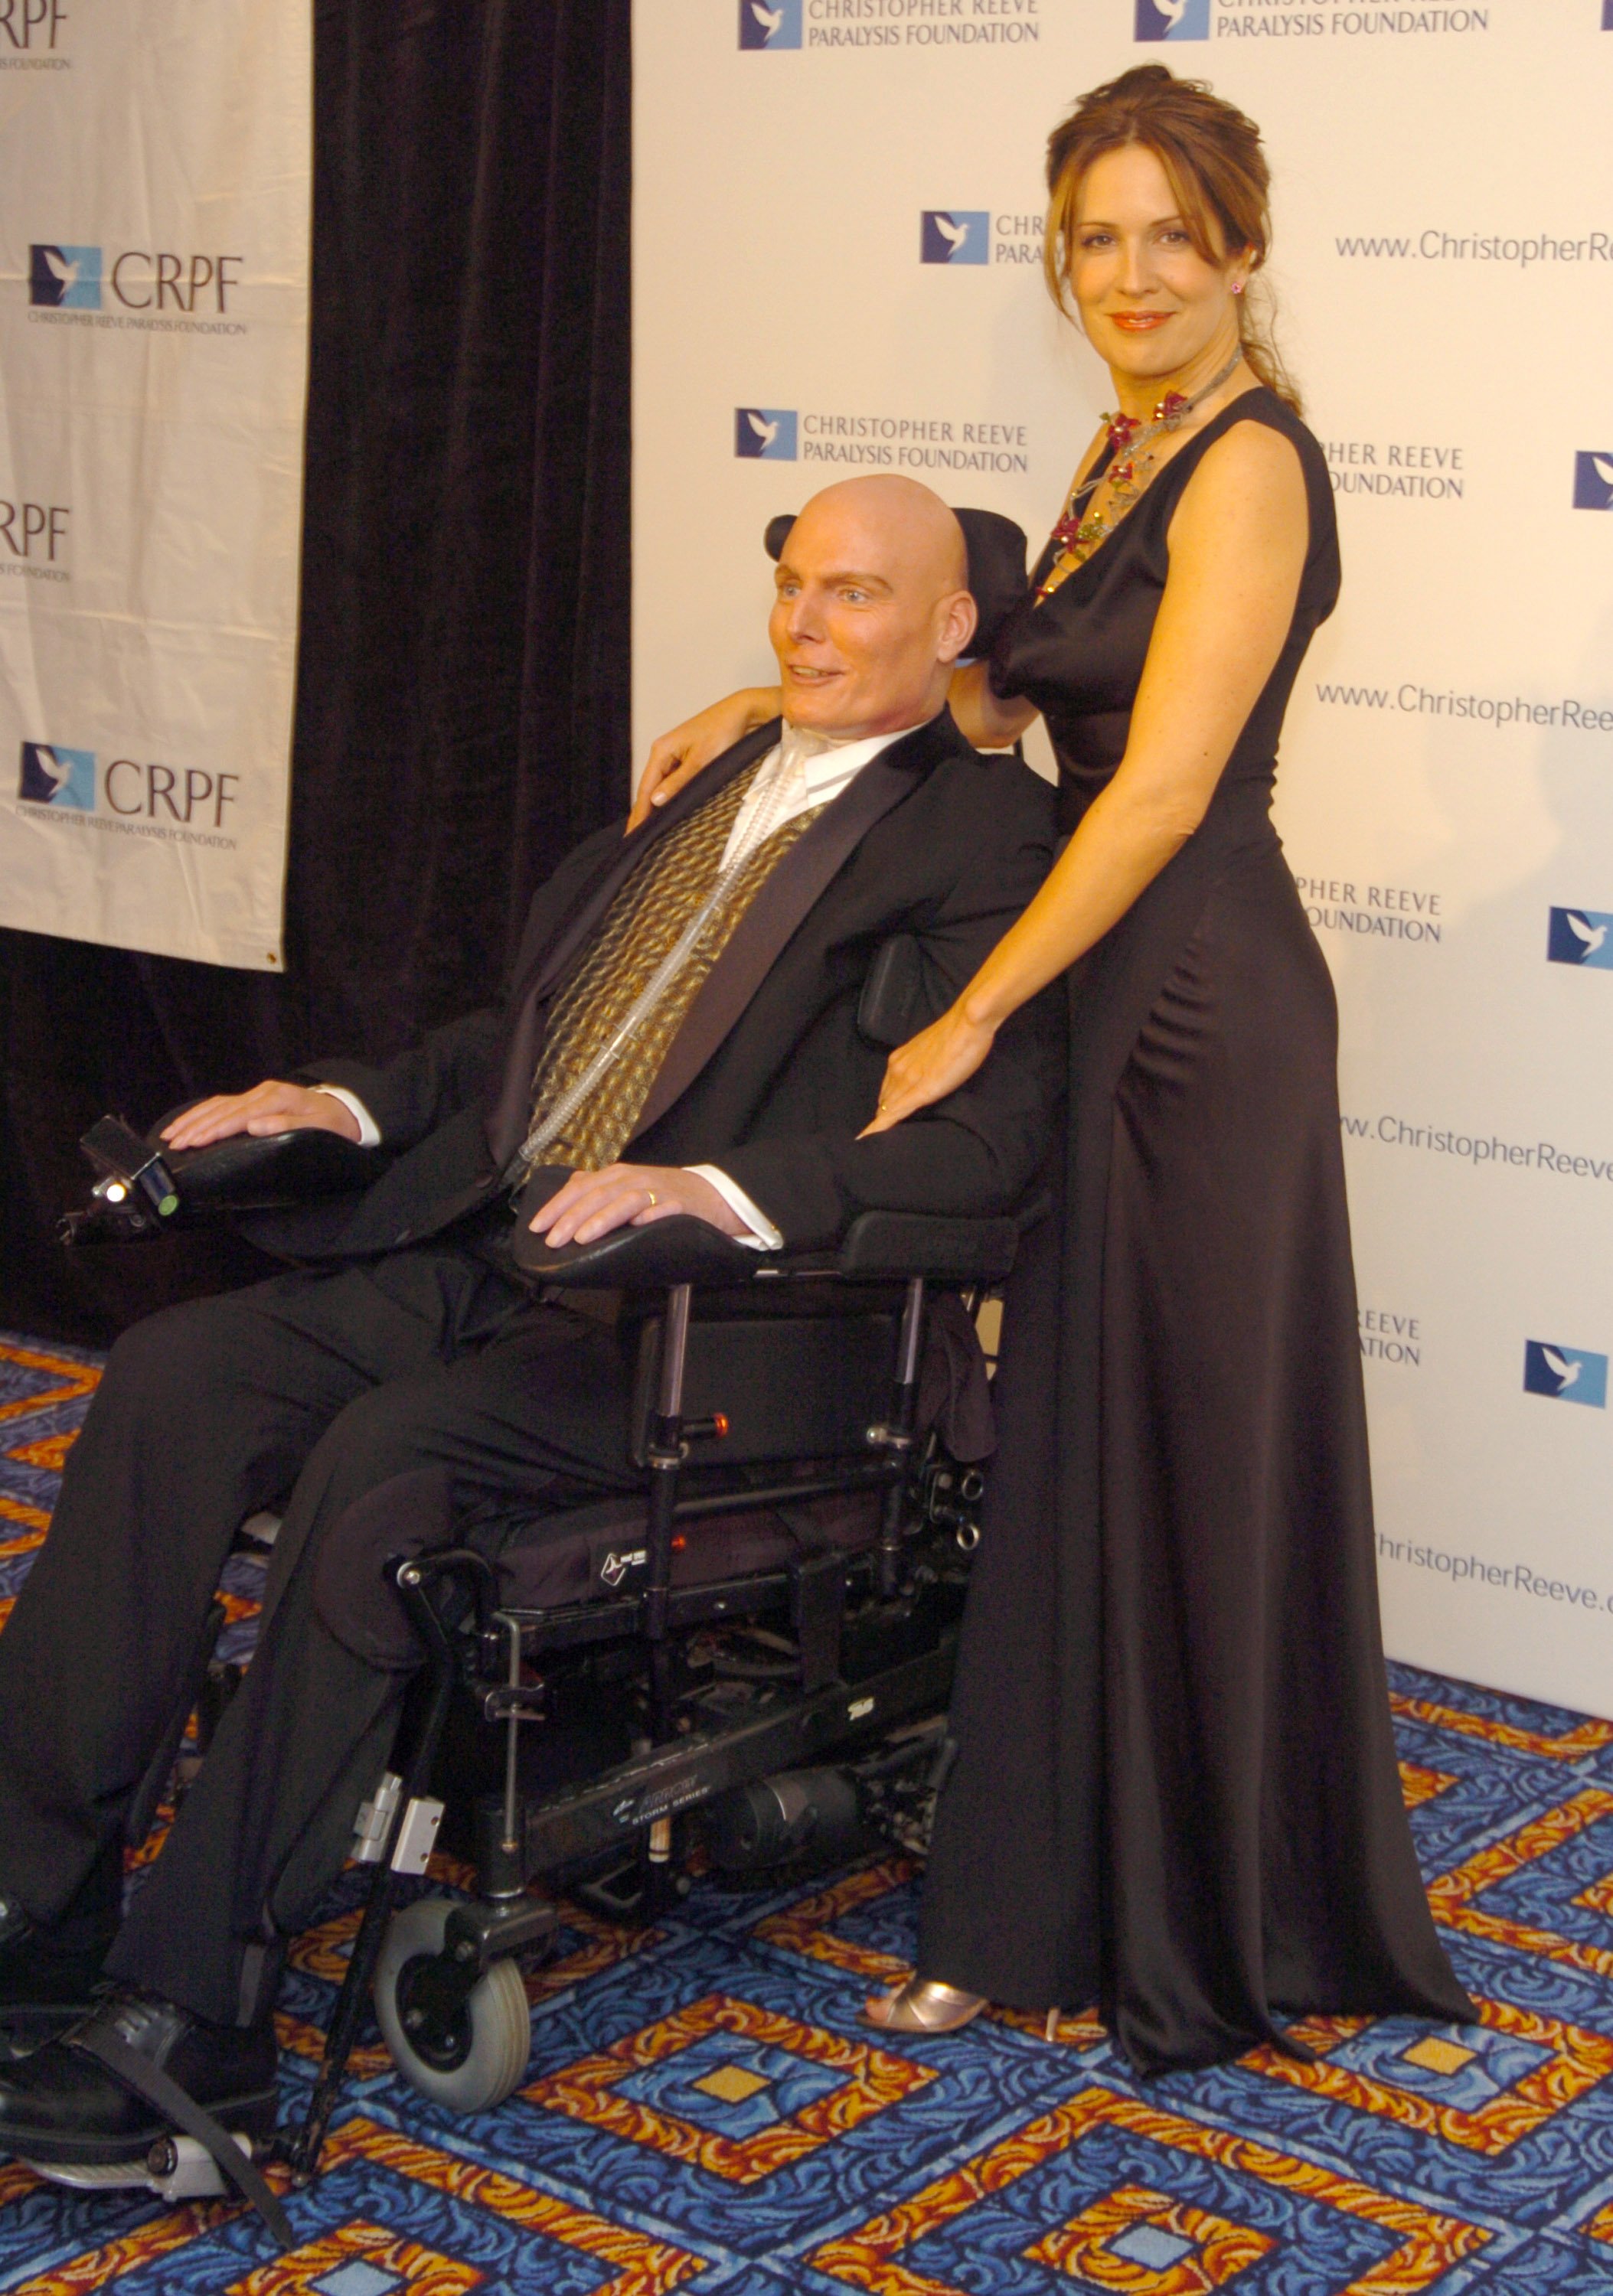 Christopher Reeve and wife Dana Reeve during 13th Annual "A Magical Evening" Gala Hosted by The Christopher Reeve Paralysis Foundation. | Source: Getty Images